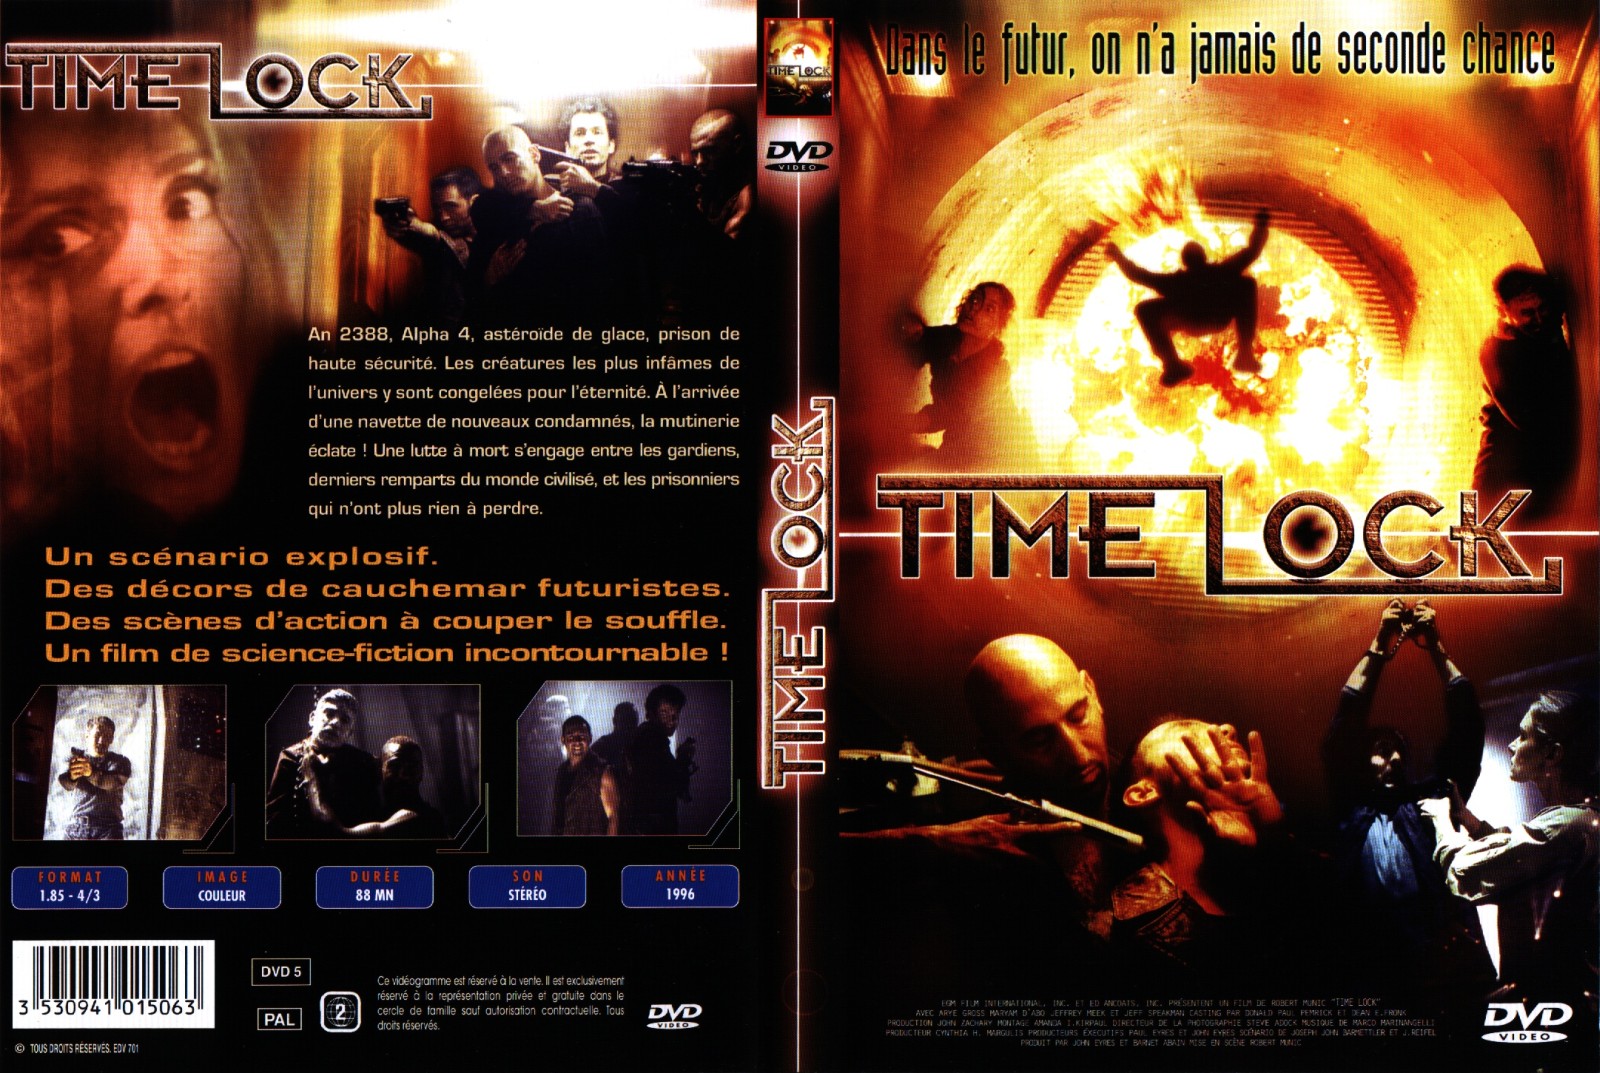 Jaquette DVD Timelock